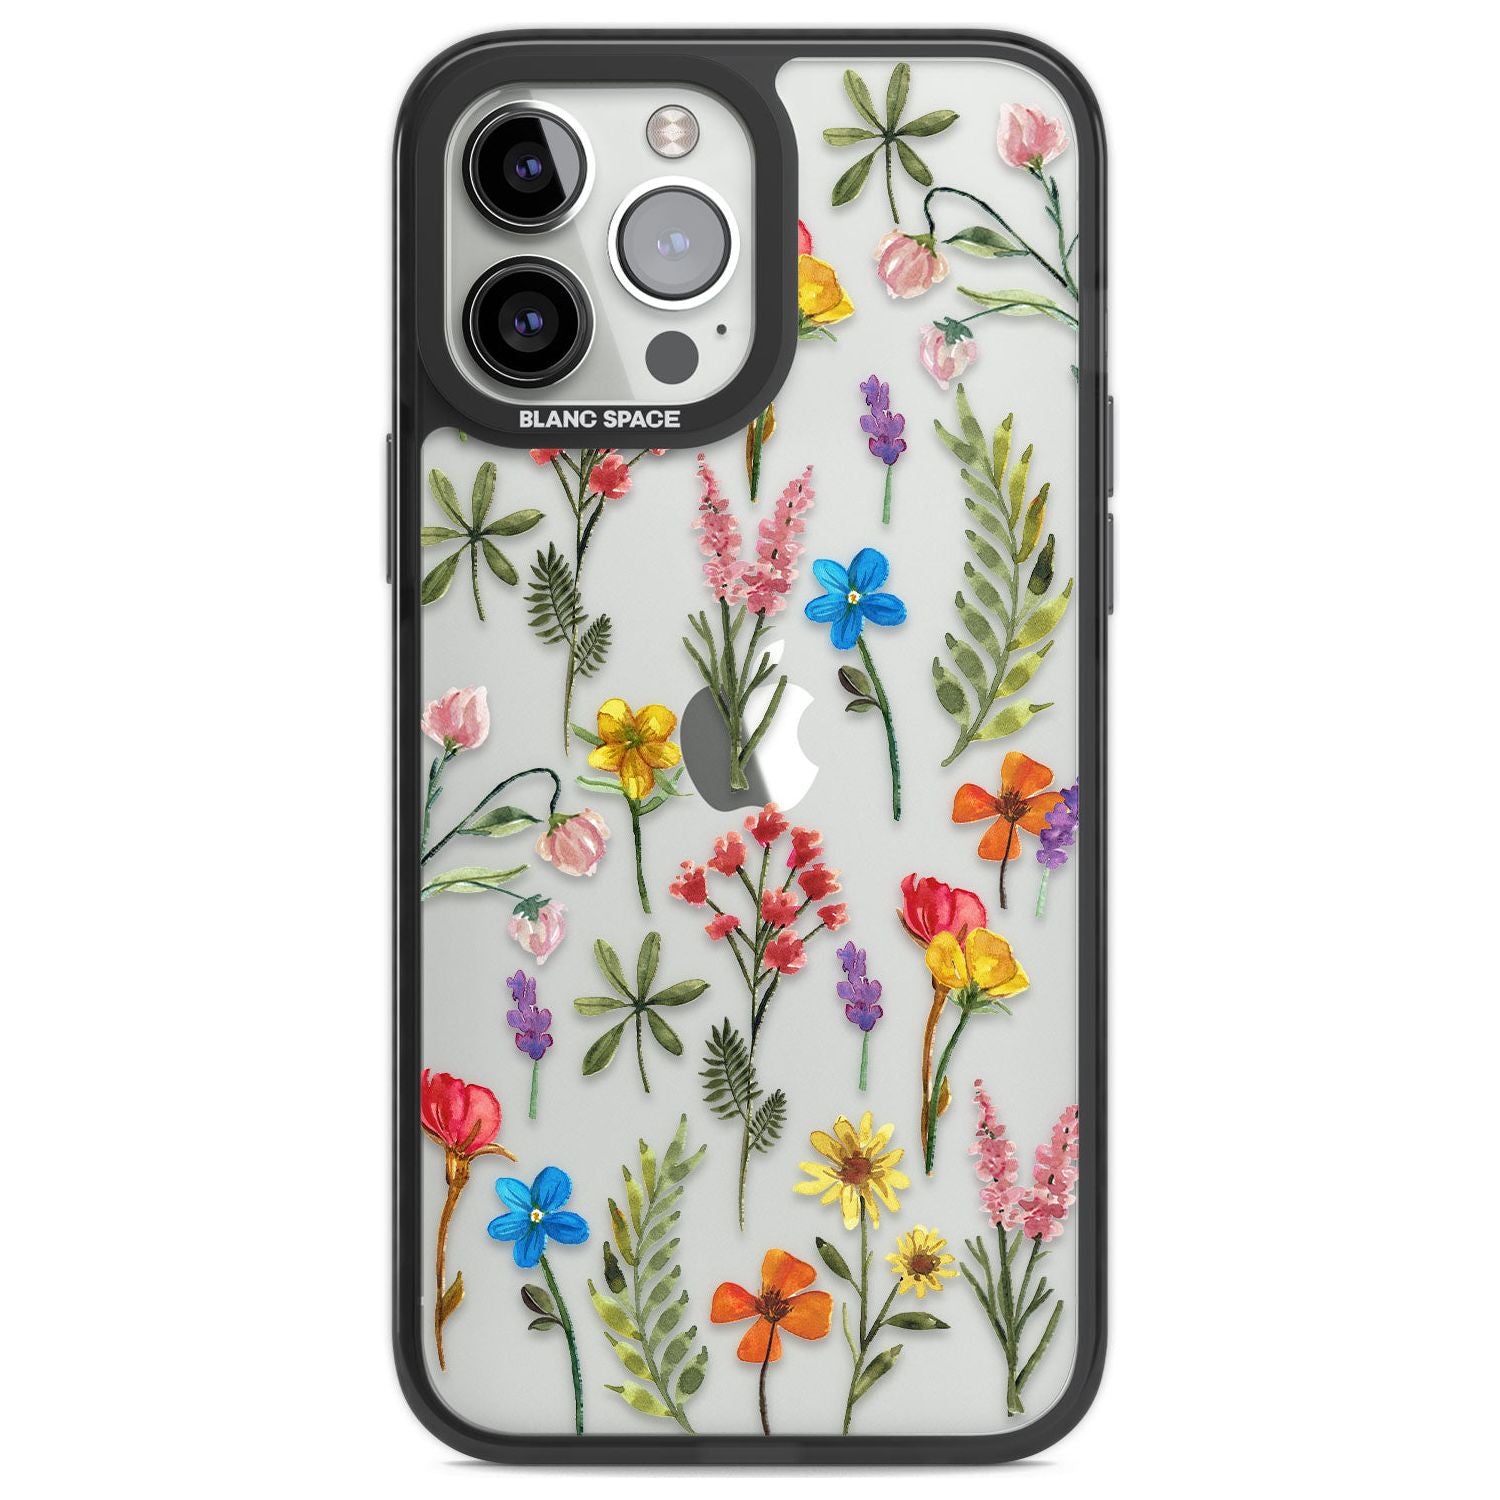 Floral iPhone Cases - Case Warehouse - Blanc Space